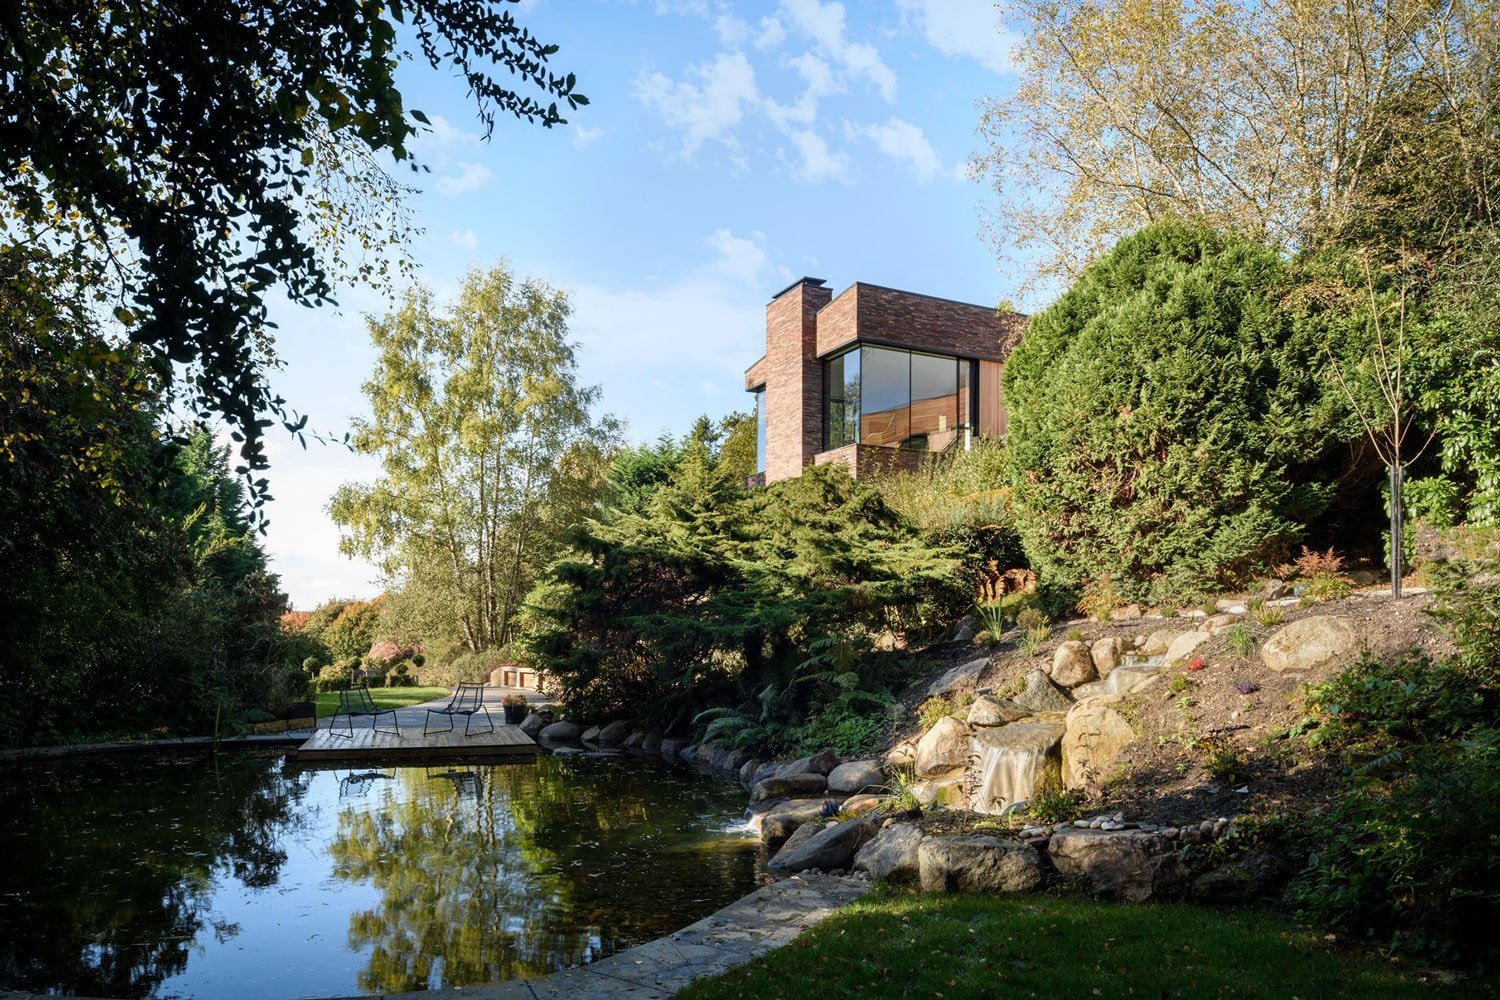 gia-design-awards-2022-residential-small-highly-commended-technique-architecture-and-design-the-pond-house-photographer-zac-and-zac-6.jpg